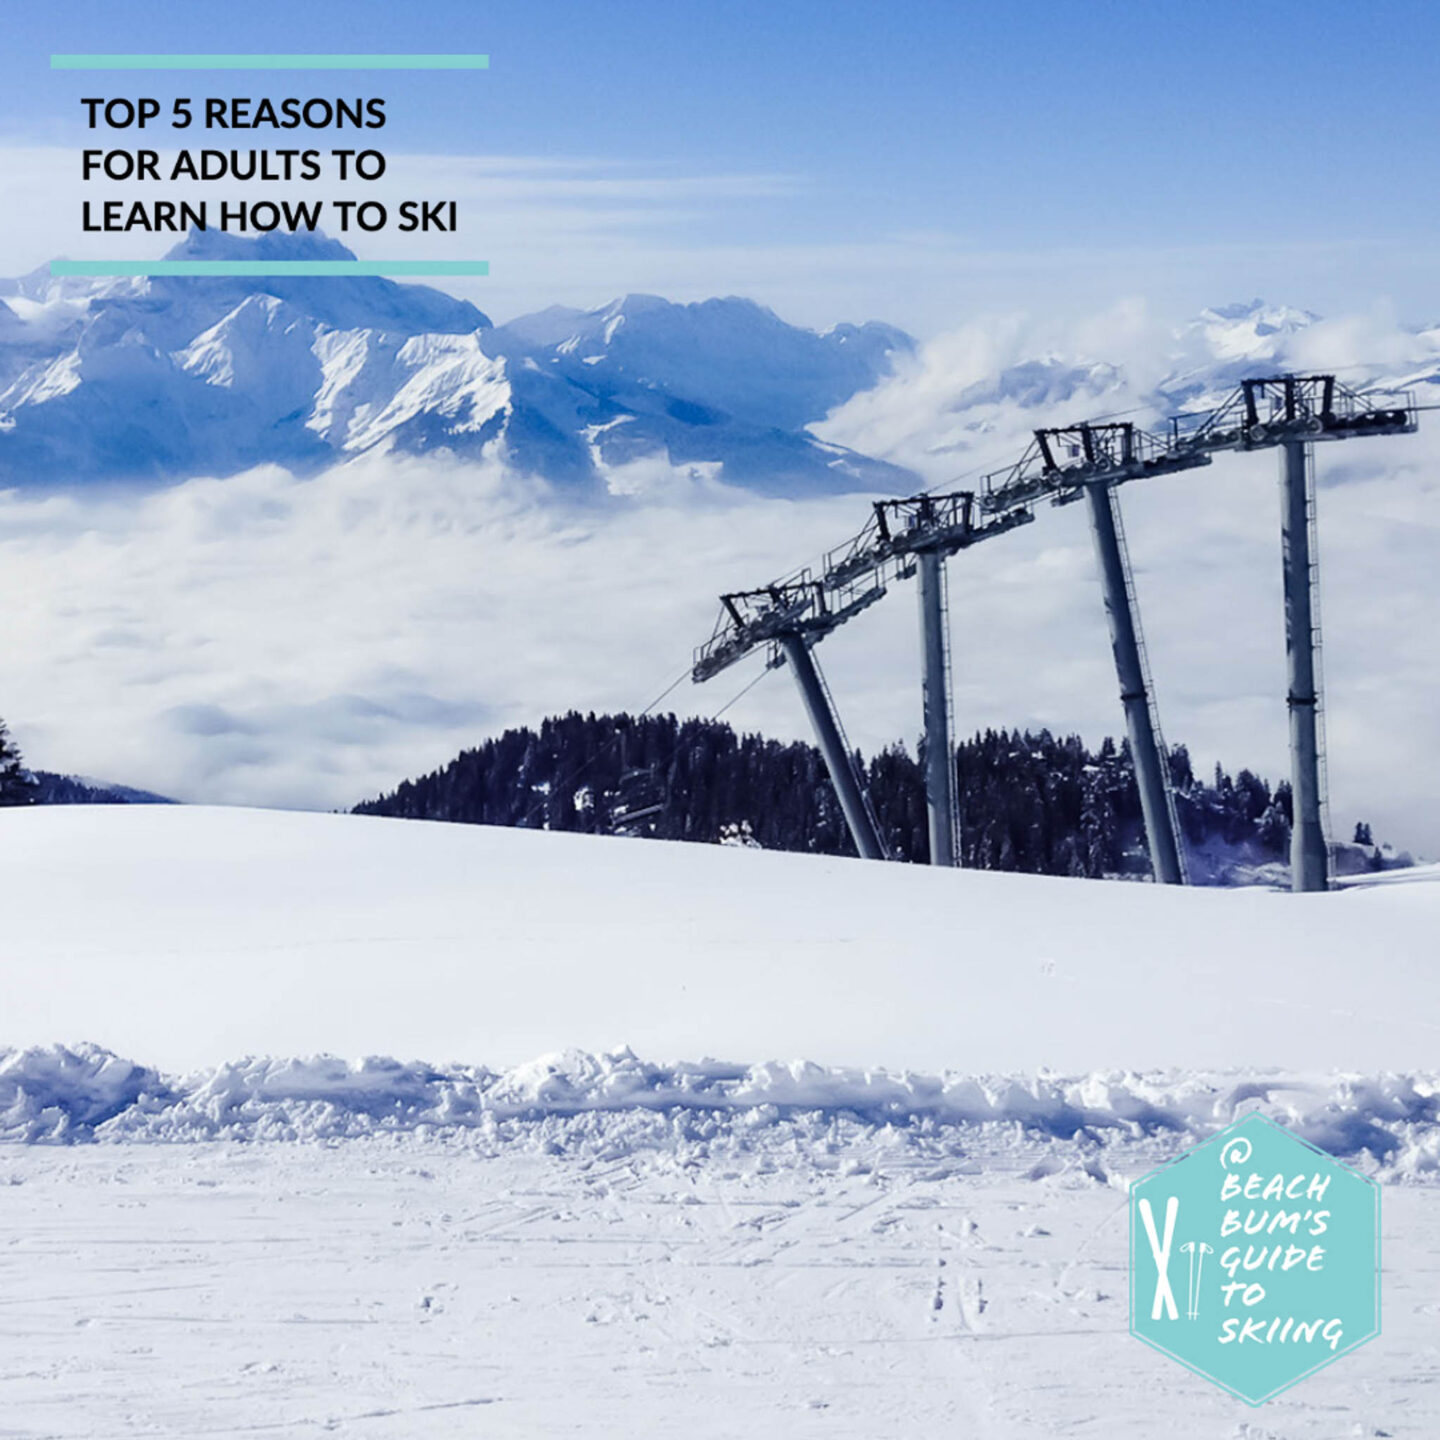 Top 5 reasons to learn to ski